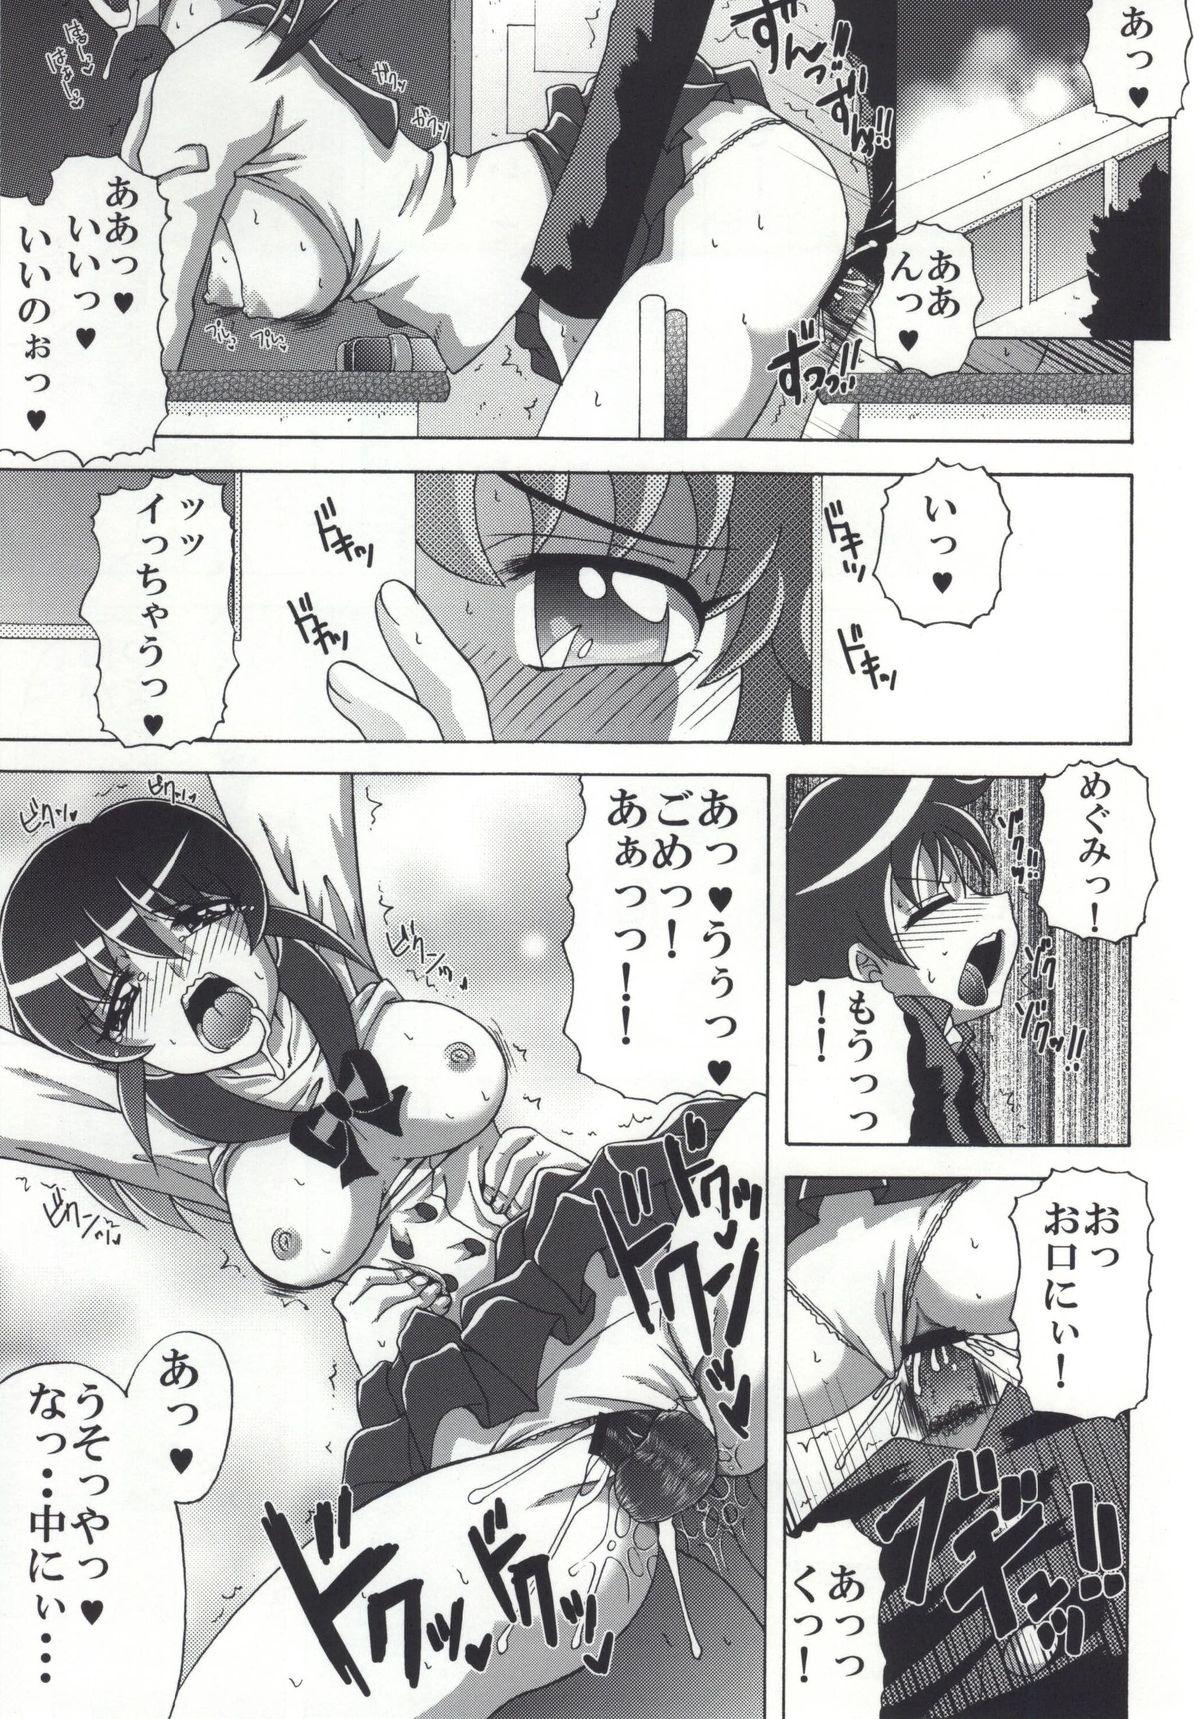 Forbidden Hime-chan no Tomodachi - Happinesscharge precure Suckingdick - Page 2